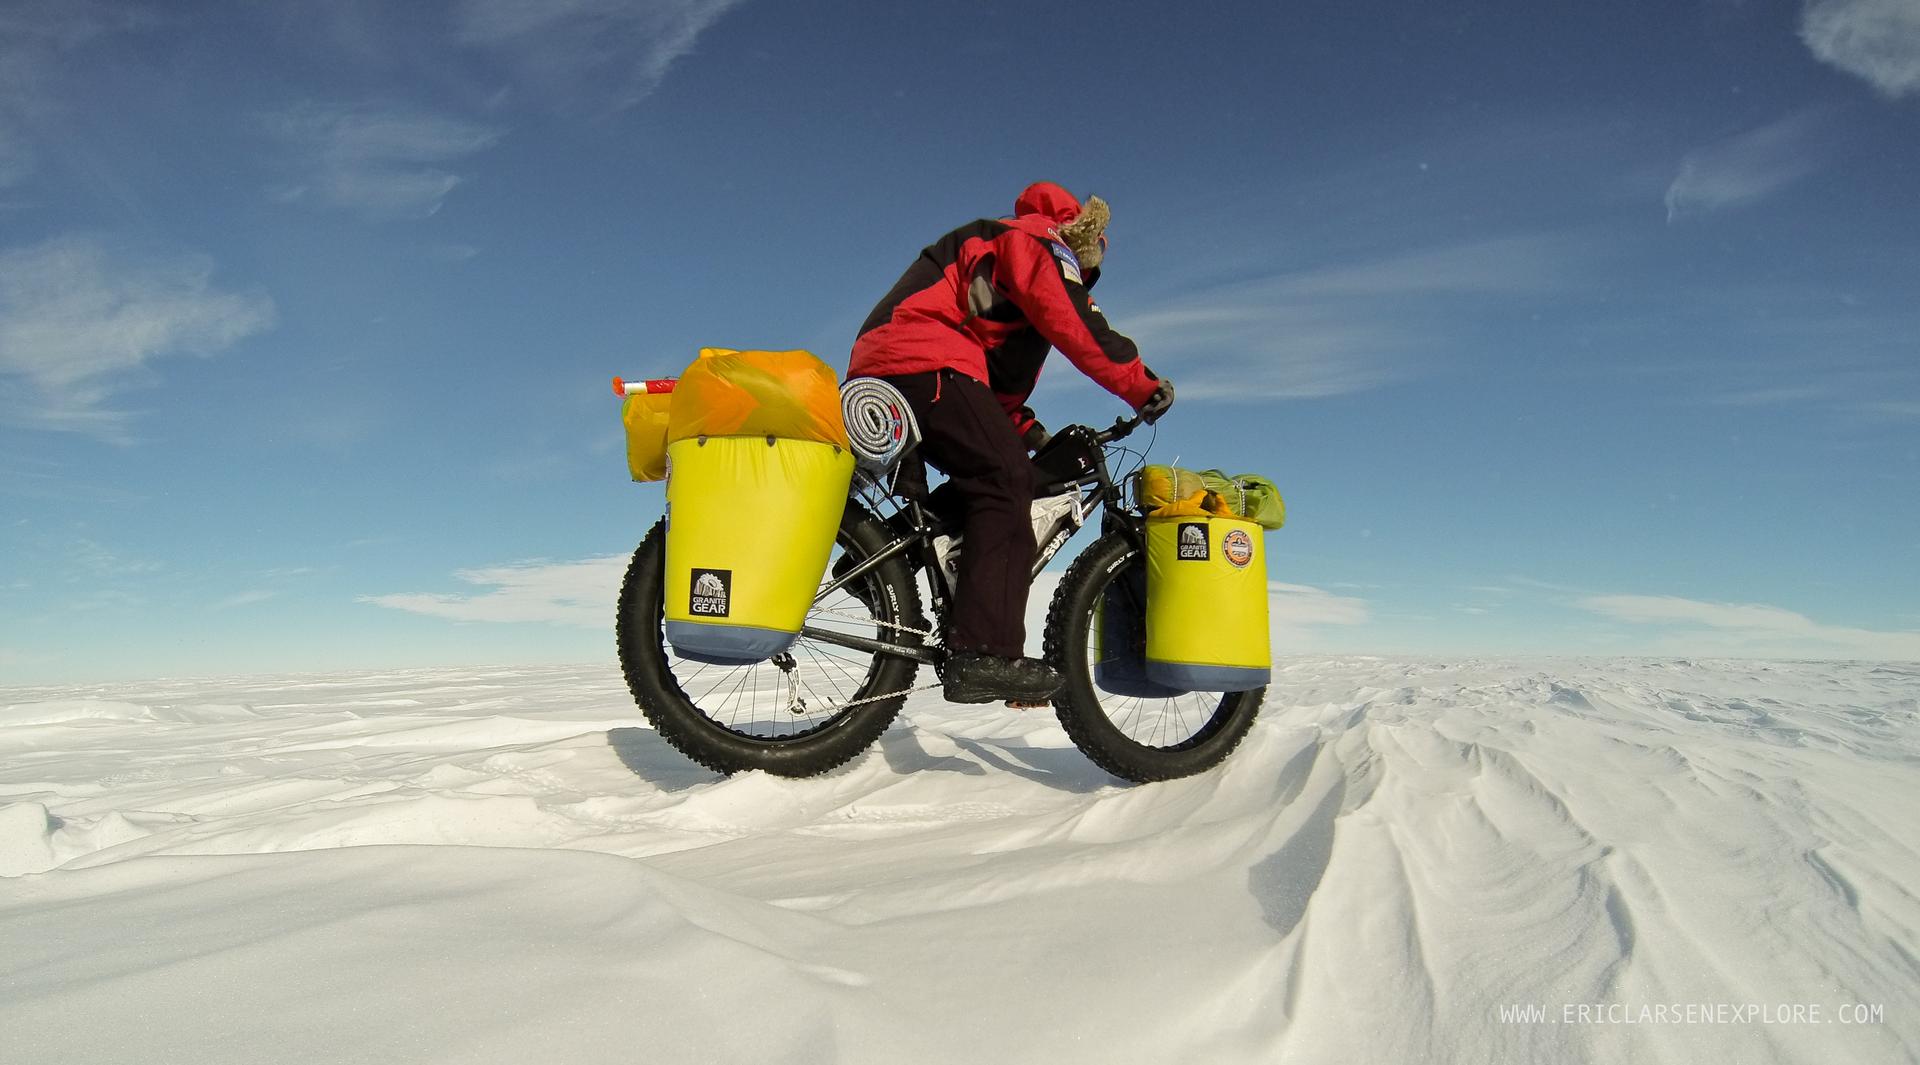 Eric Larsen took this photo of himself on his attempt to become the first person to bike across Antarctica to the Geographic South Pole. He set up a camera on a tripod, and used an intervalometer.